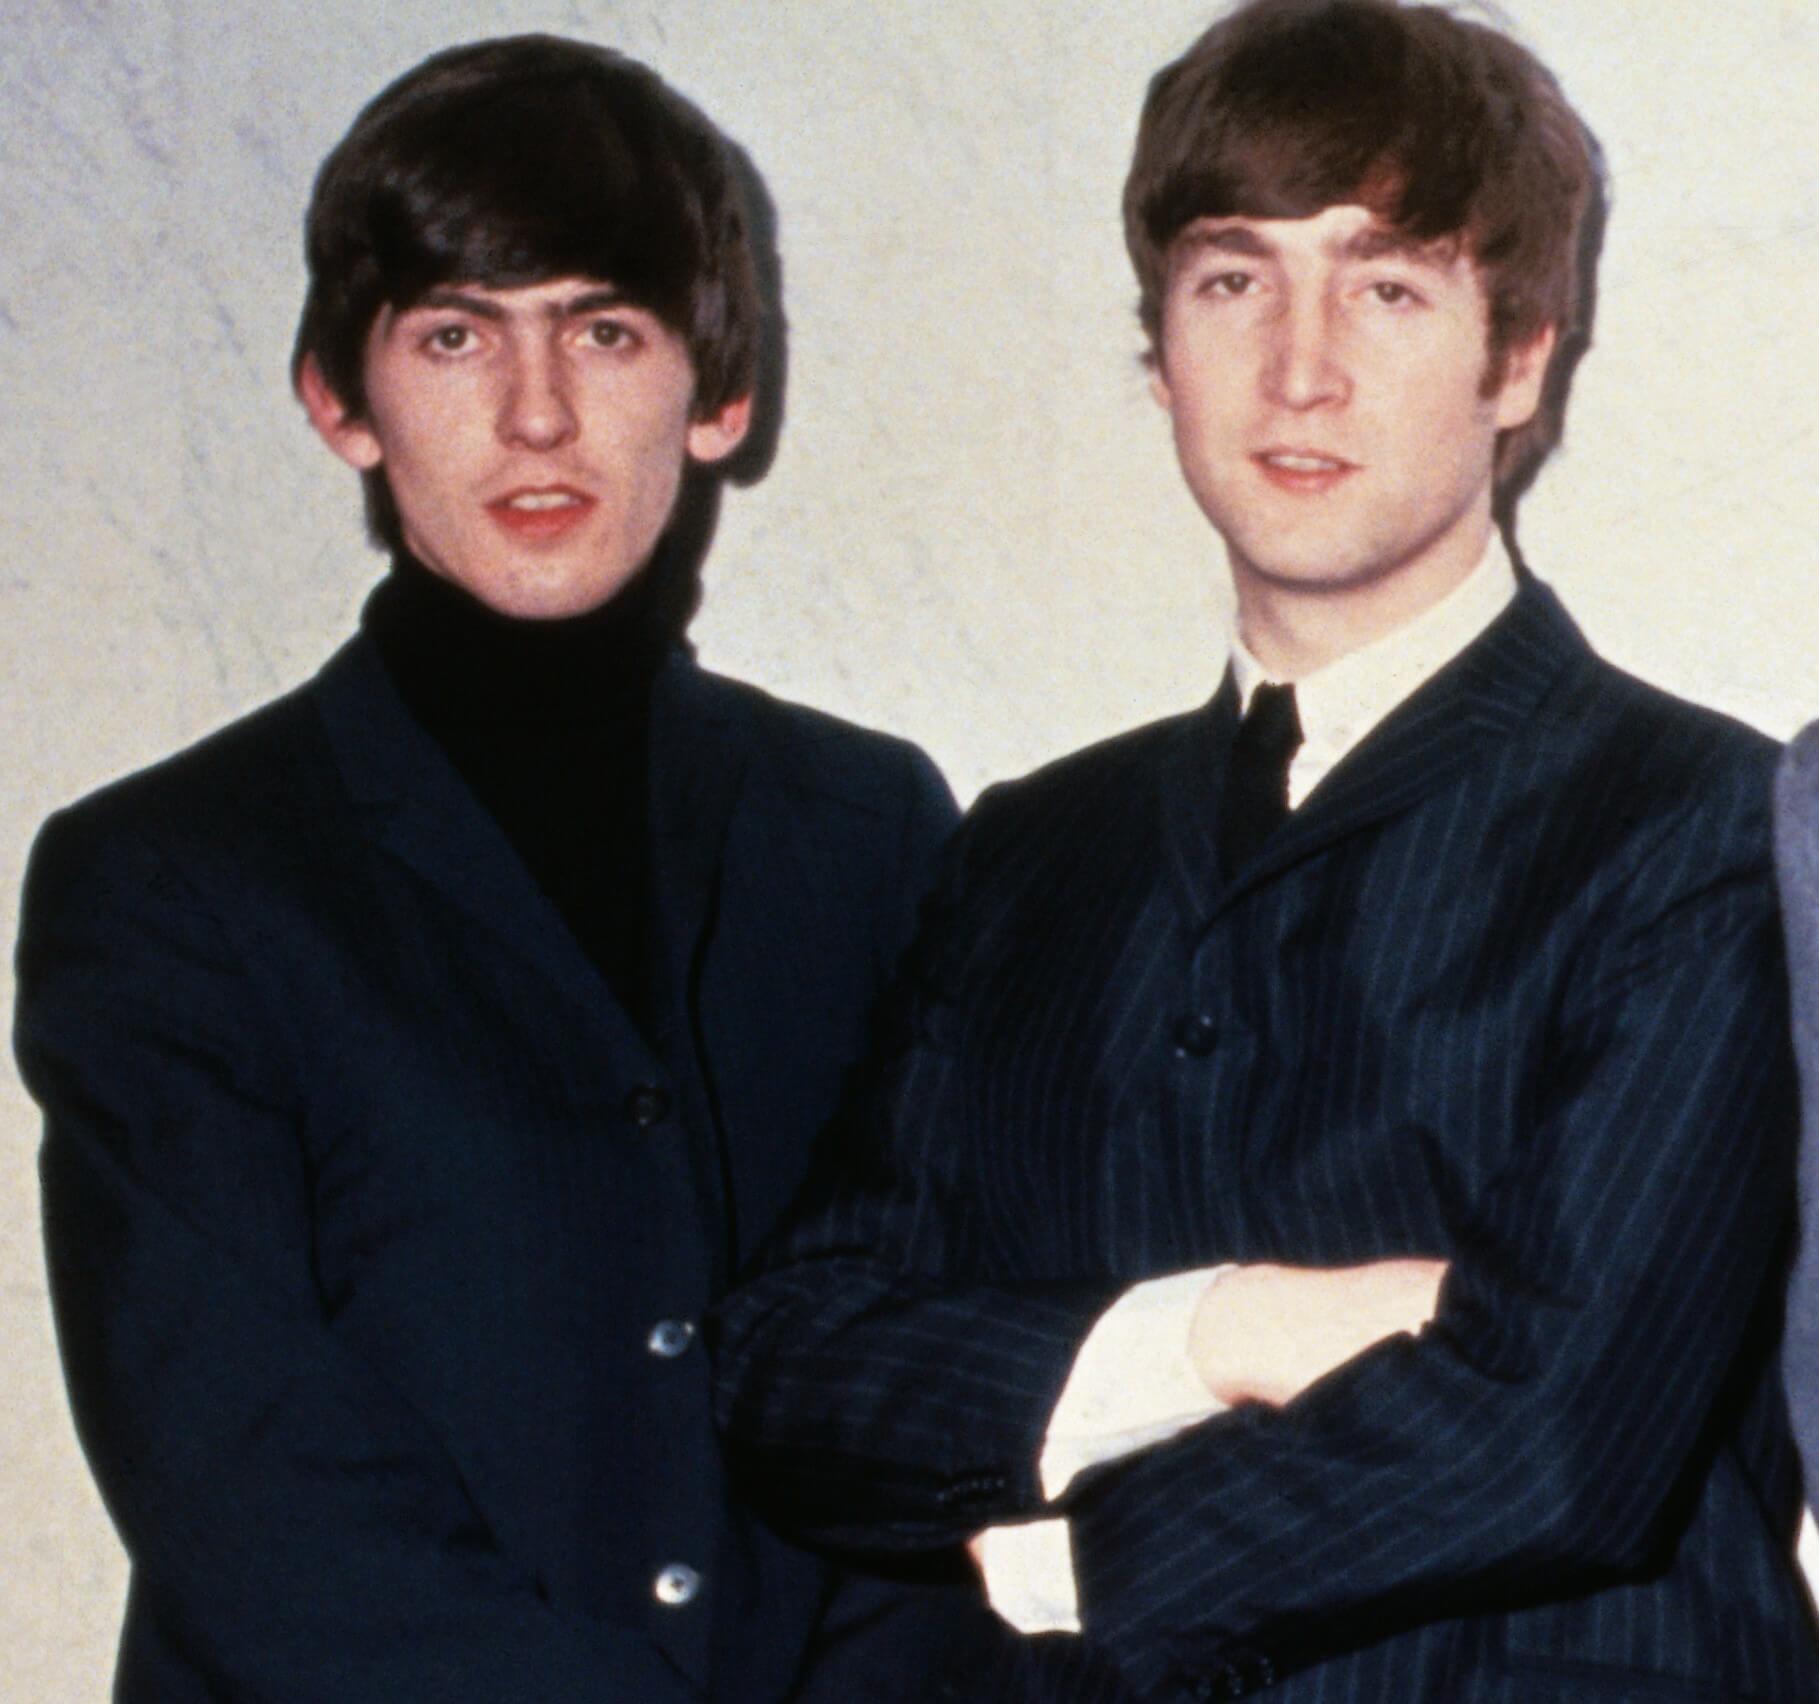 George Harrison and John Lennon in suits